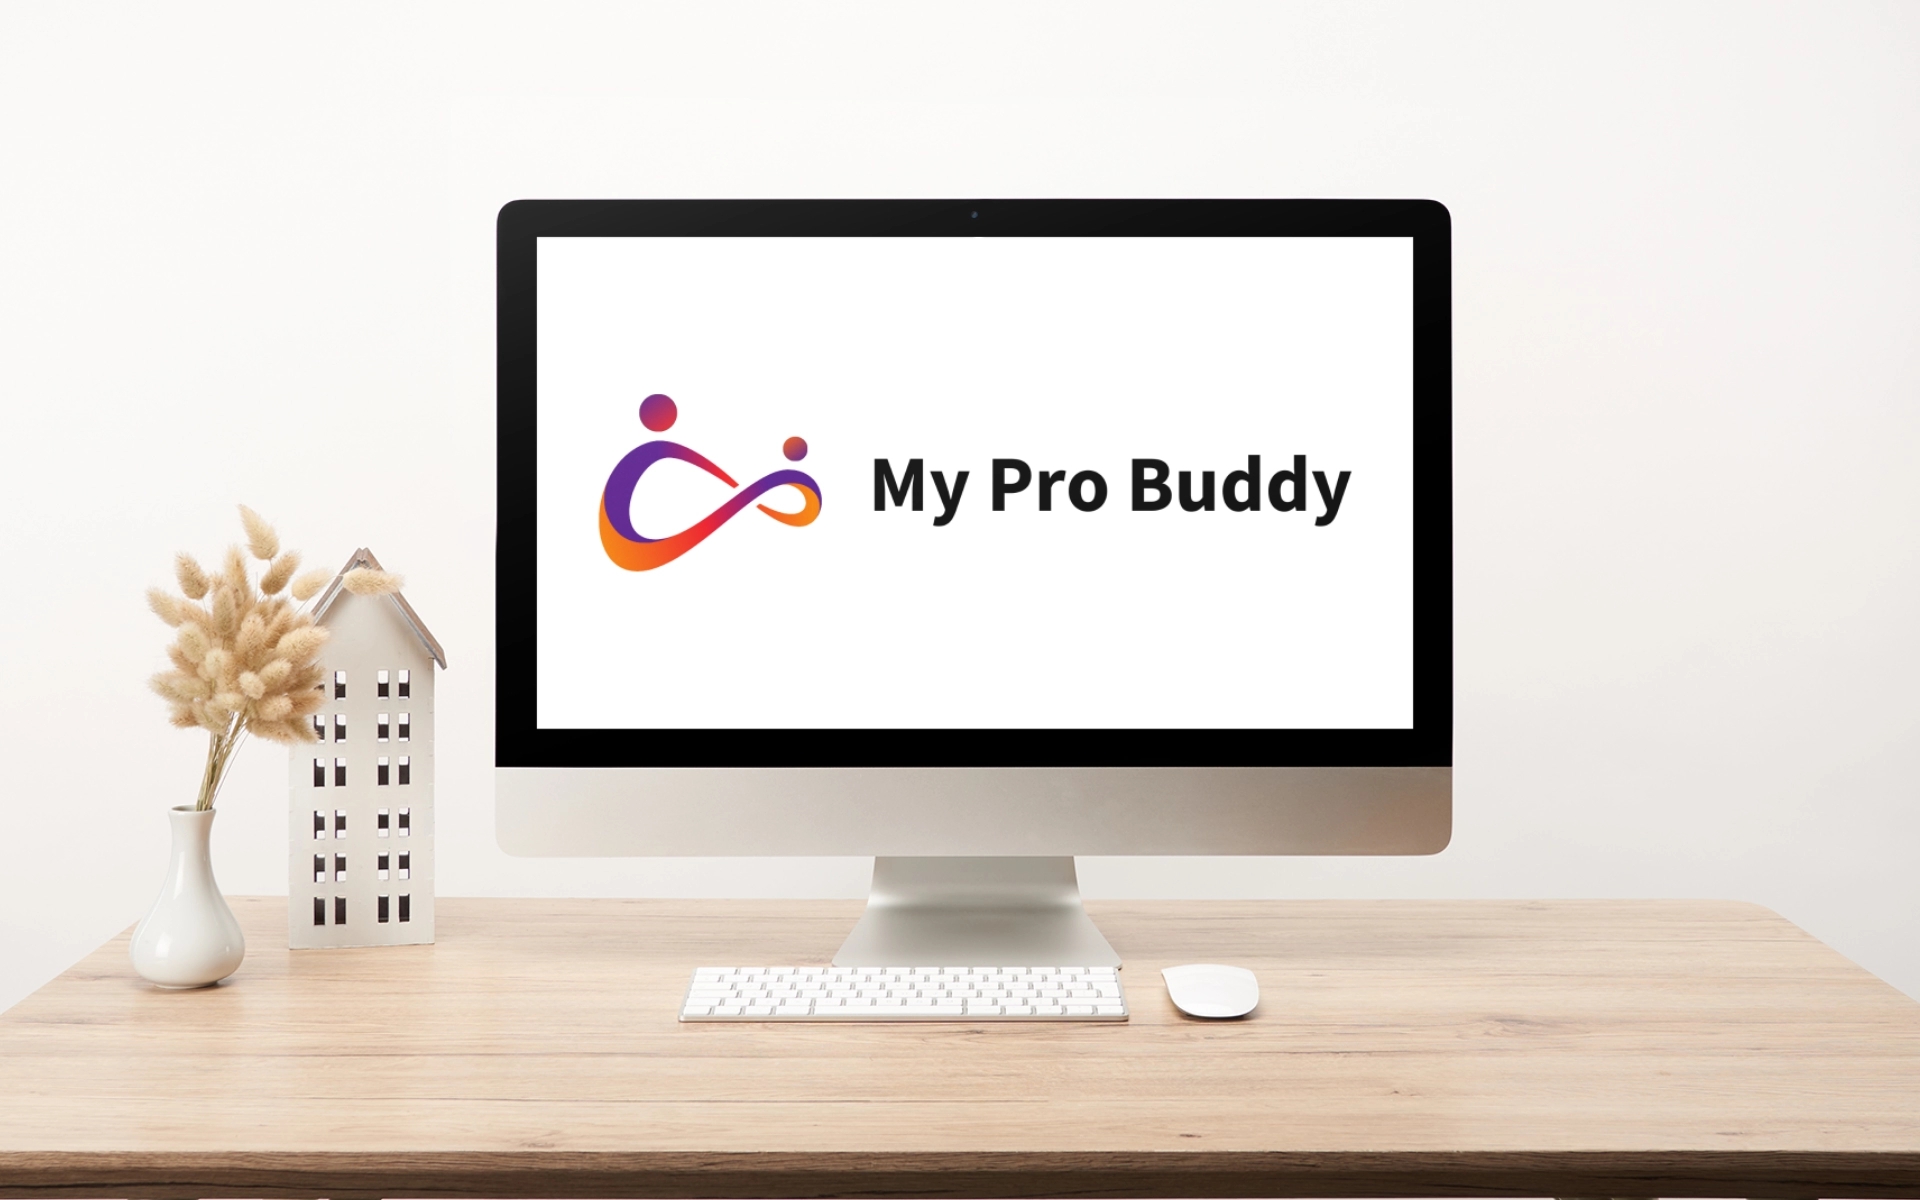 Branding for My Pro Buddy by Hion Studios